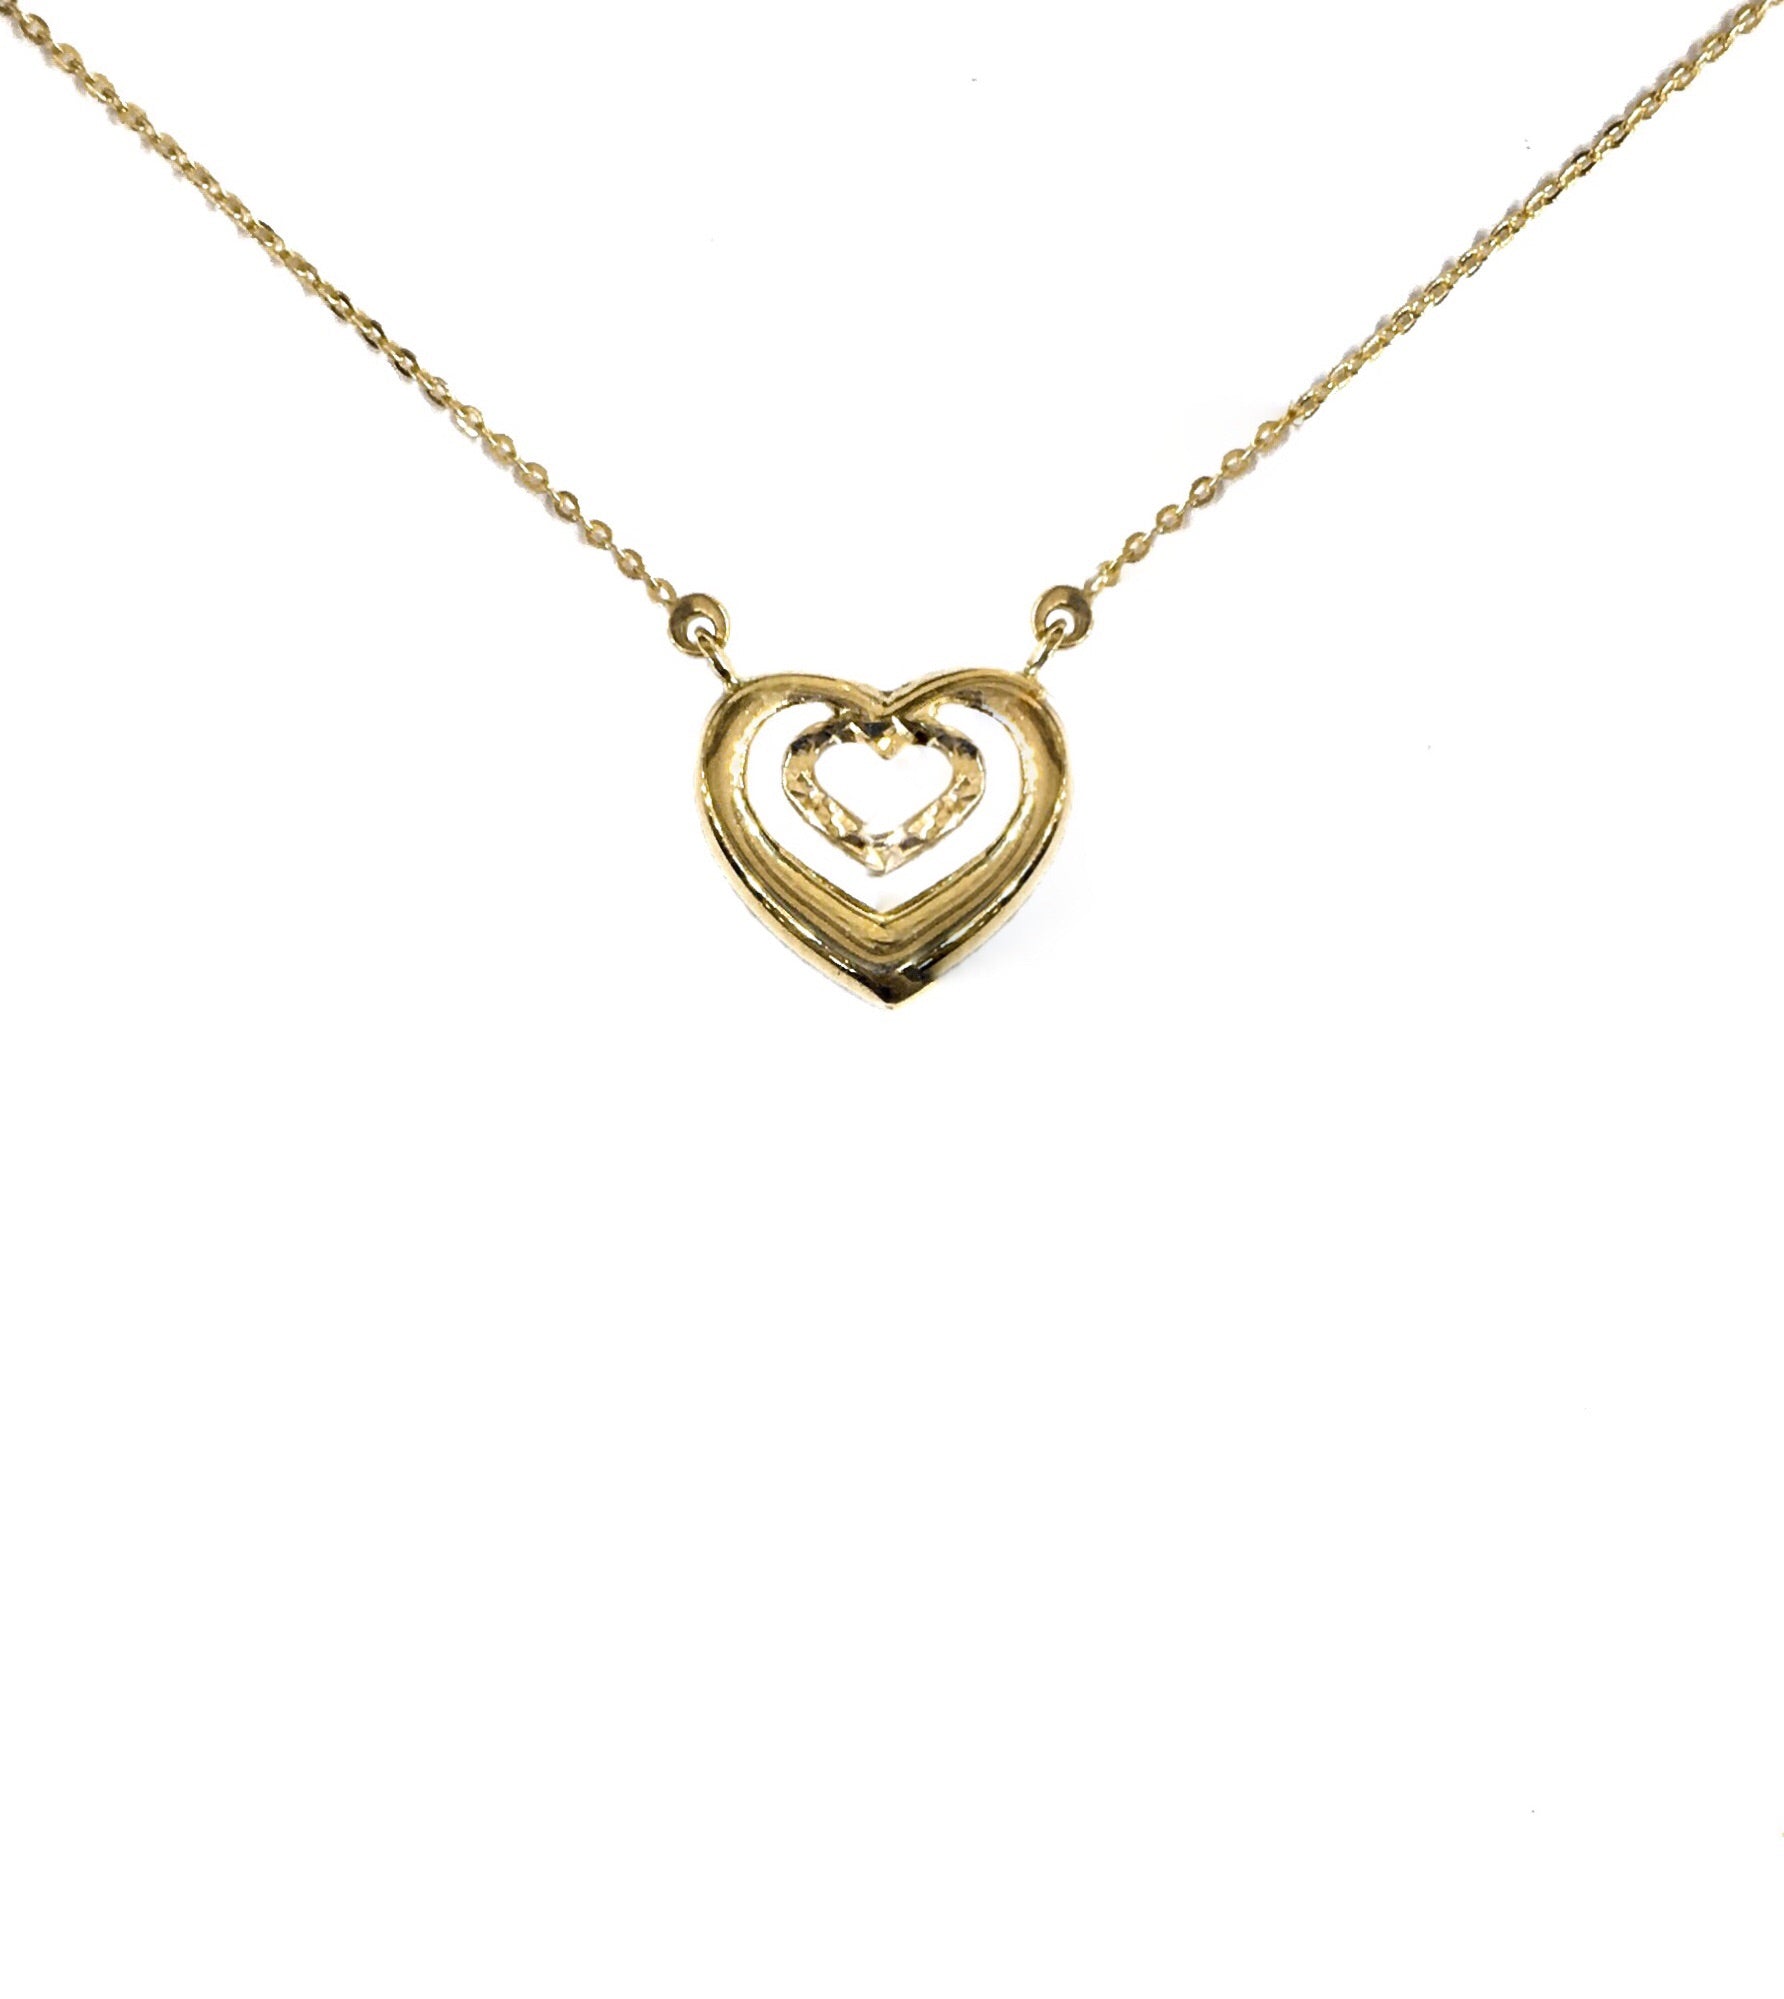 14K YELLOW GOLD FLOATING DOUBLE HEART NECKLACE